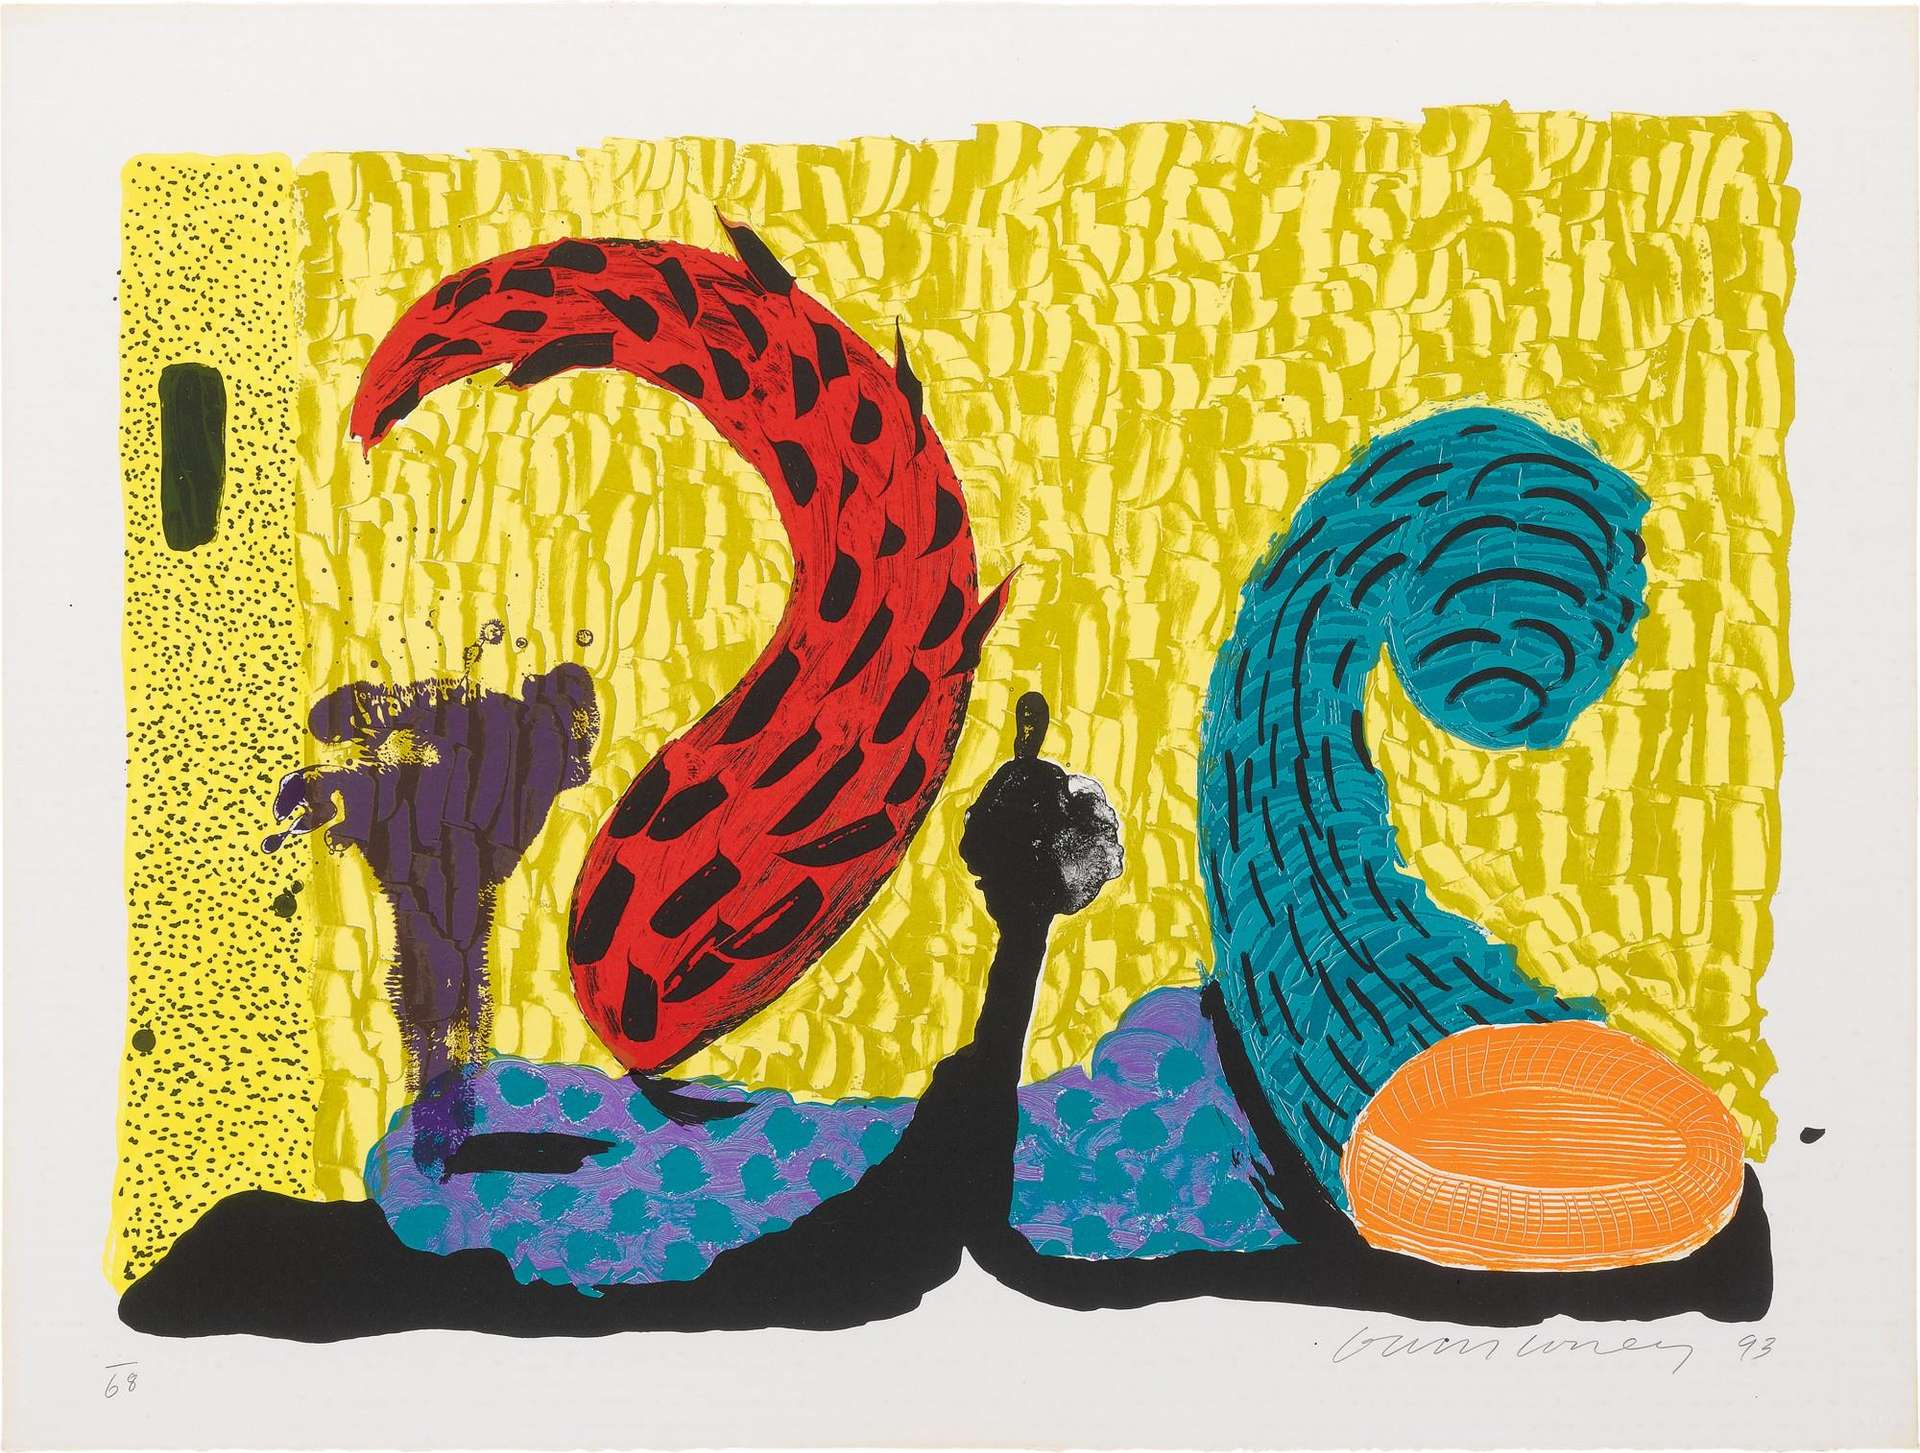 David Hockney’s Pushing Up. An etching of abstract figures and objects against a patterned, yellow background. 